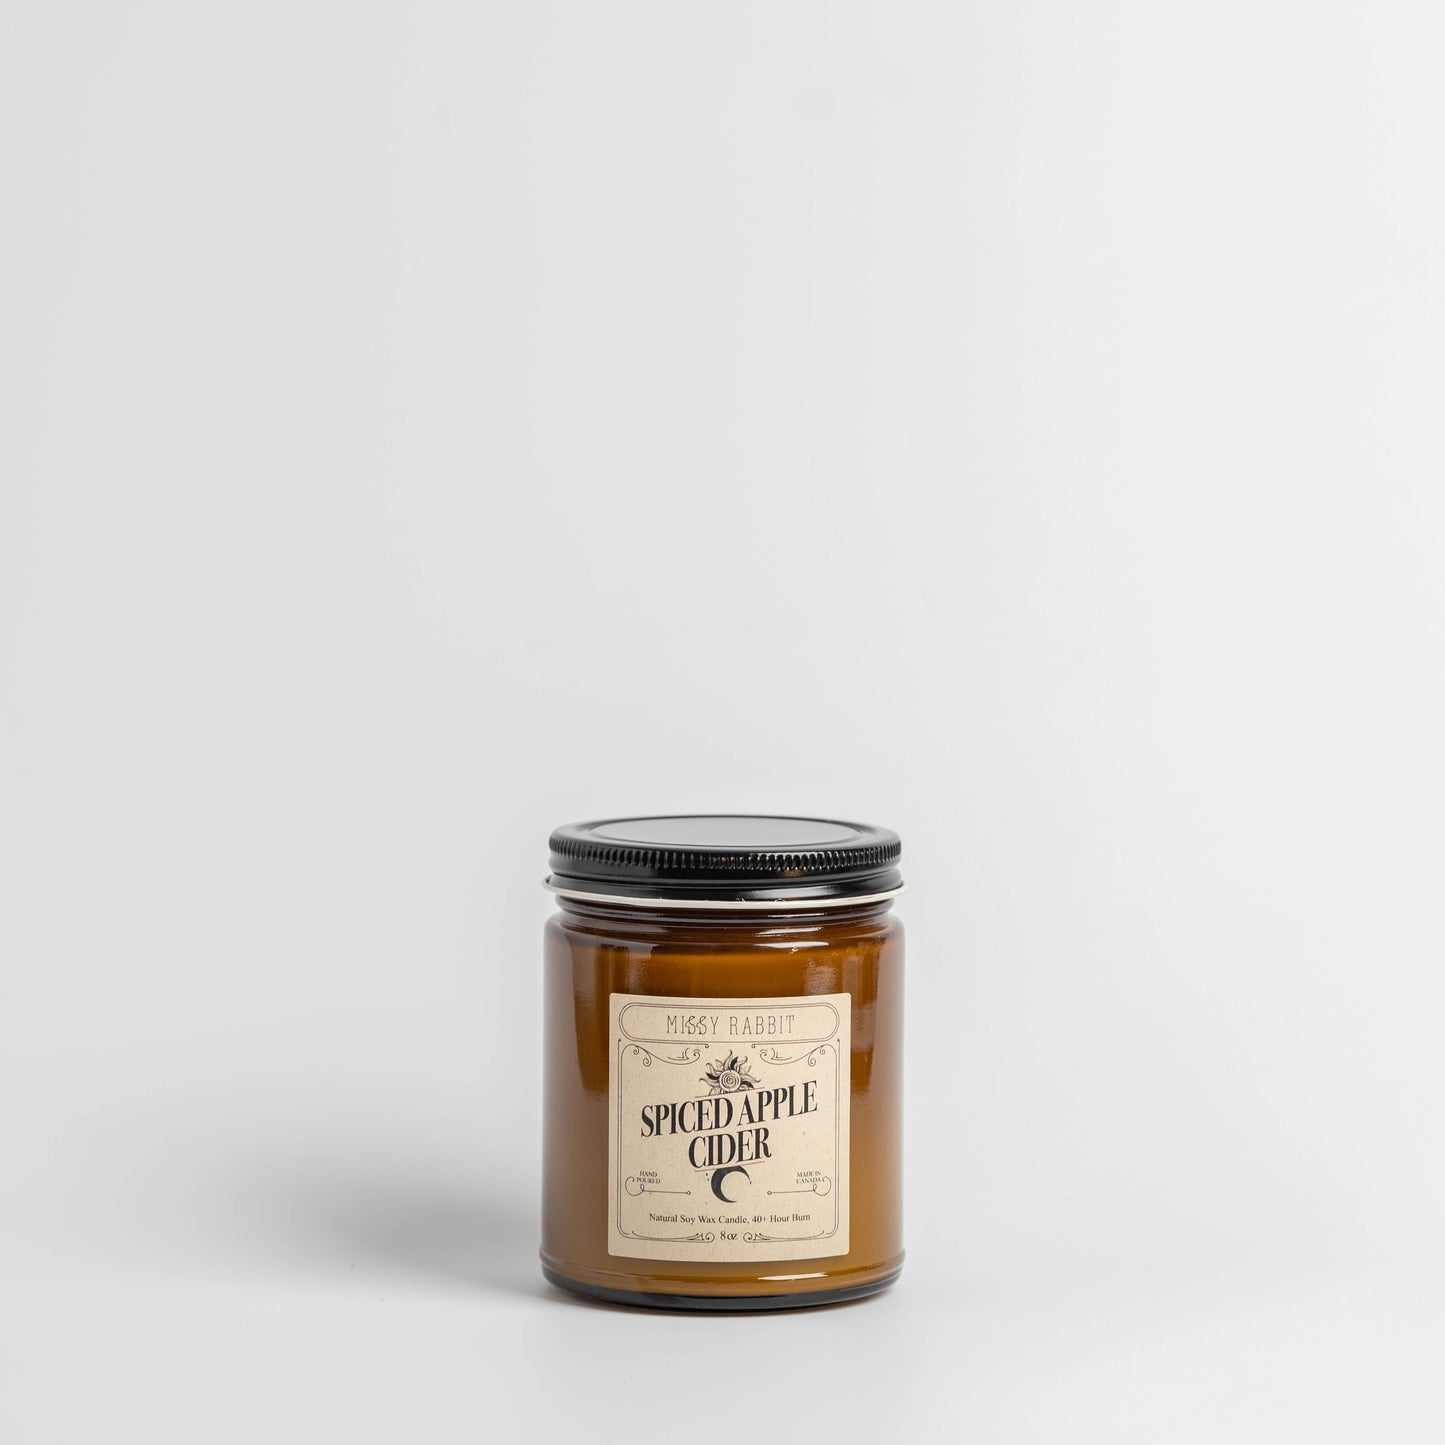 Spiced Apple Cider Handcrafted Soy Candle